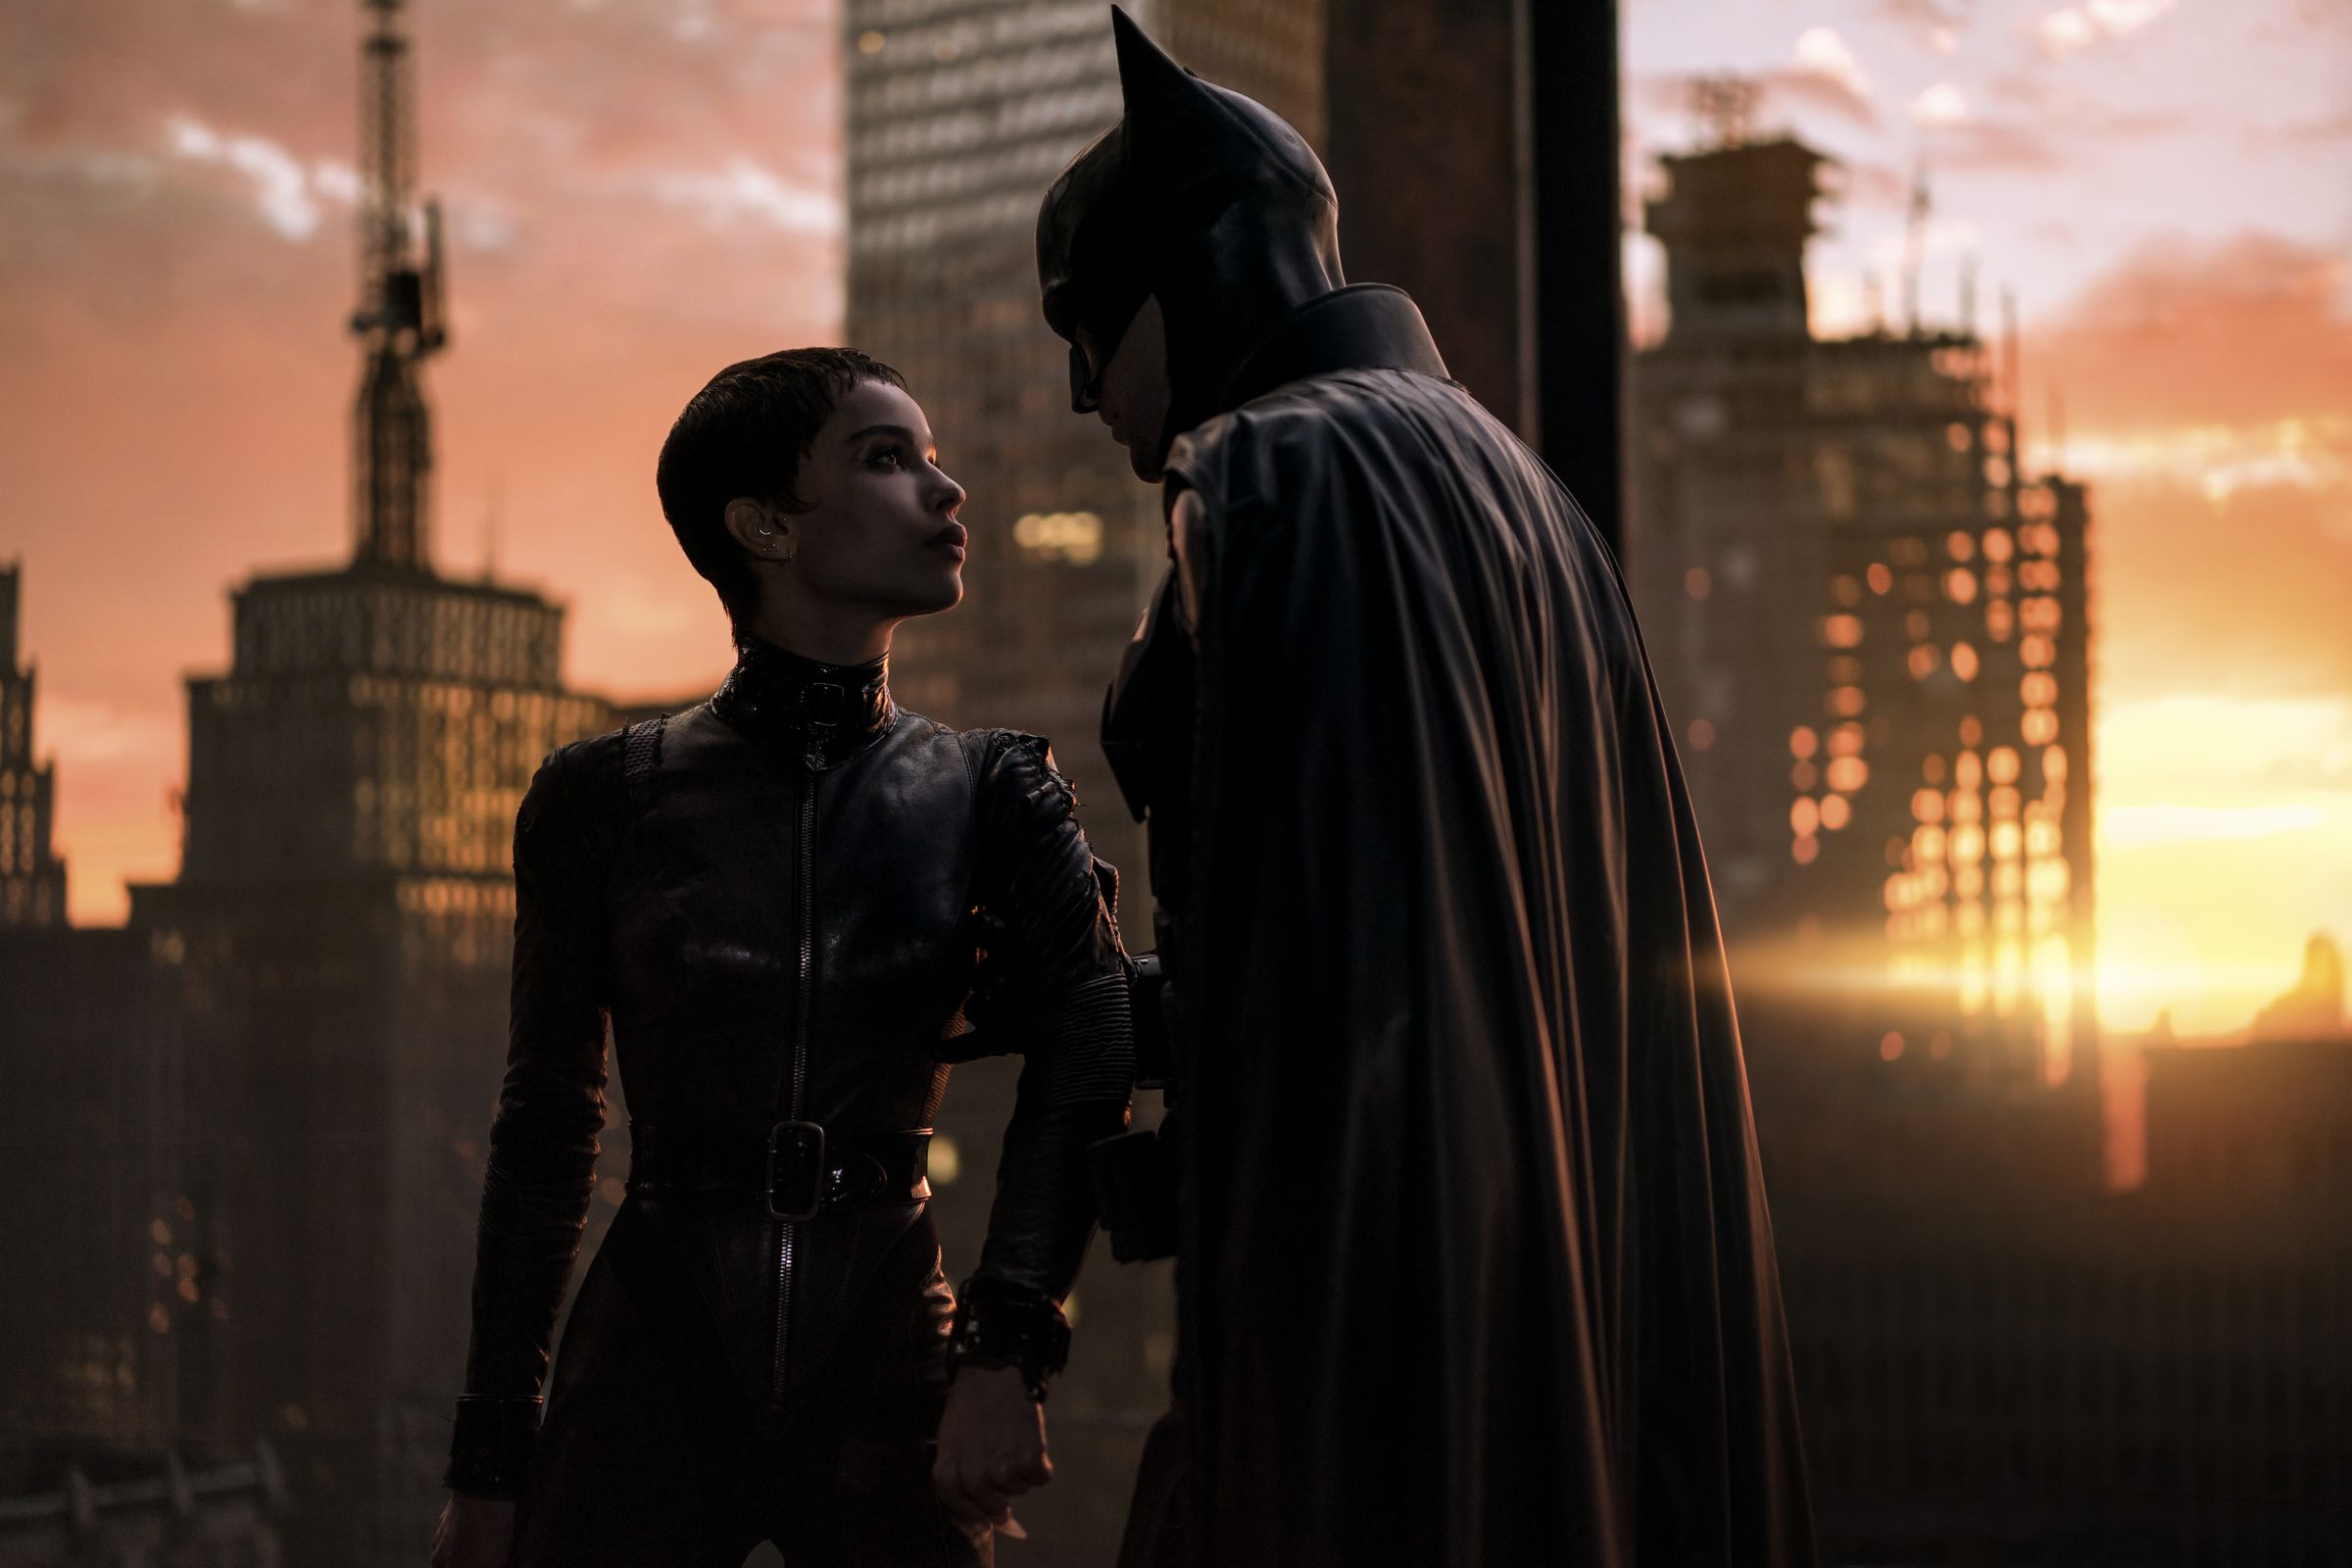 Selina Kyle and Batman atop a skyscraper disagreeing about how to handle criminals.